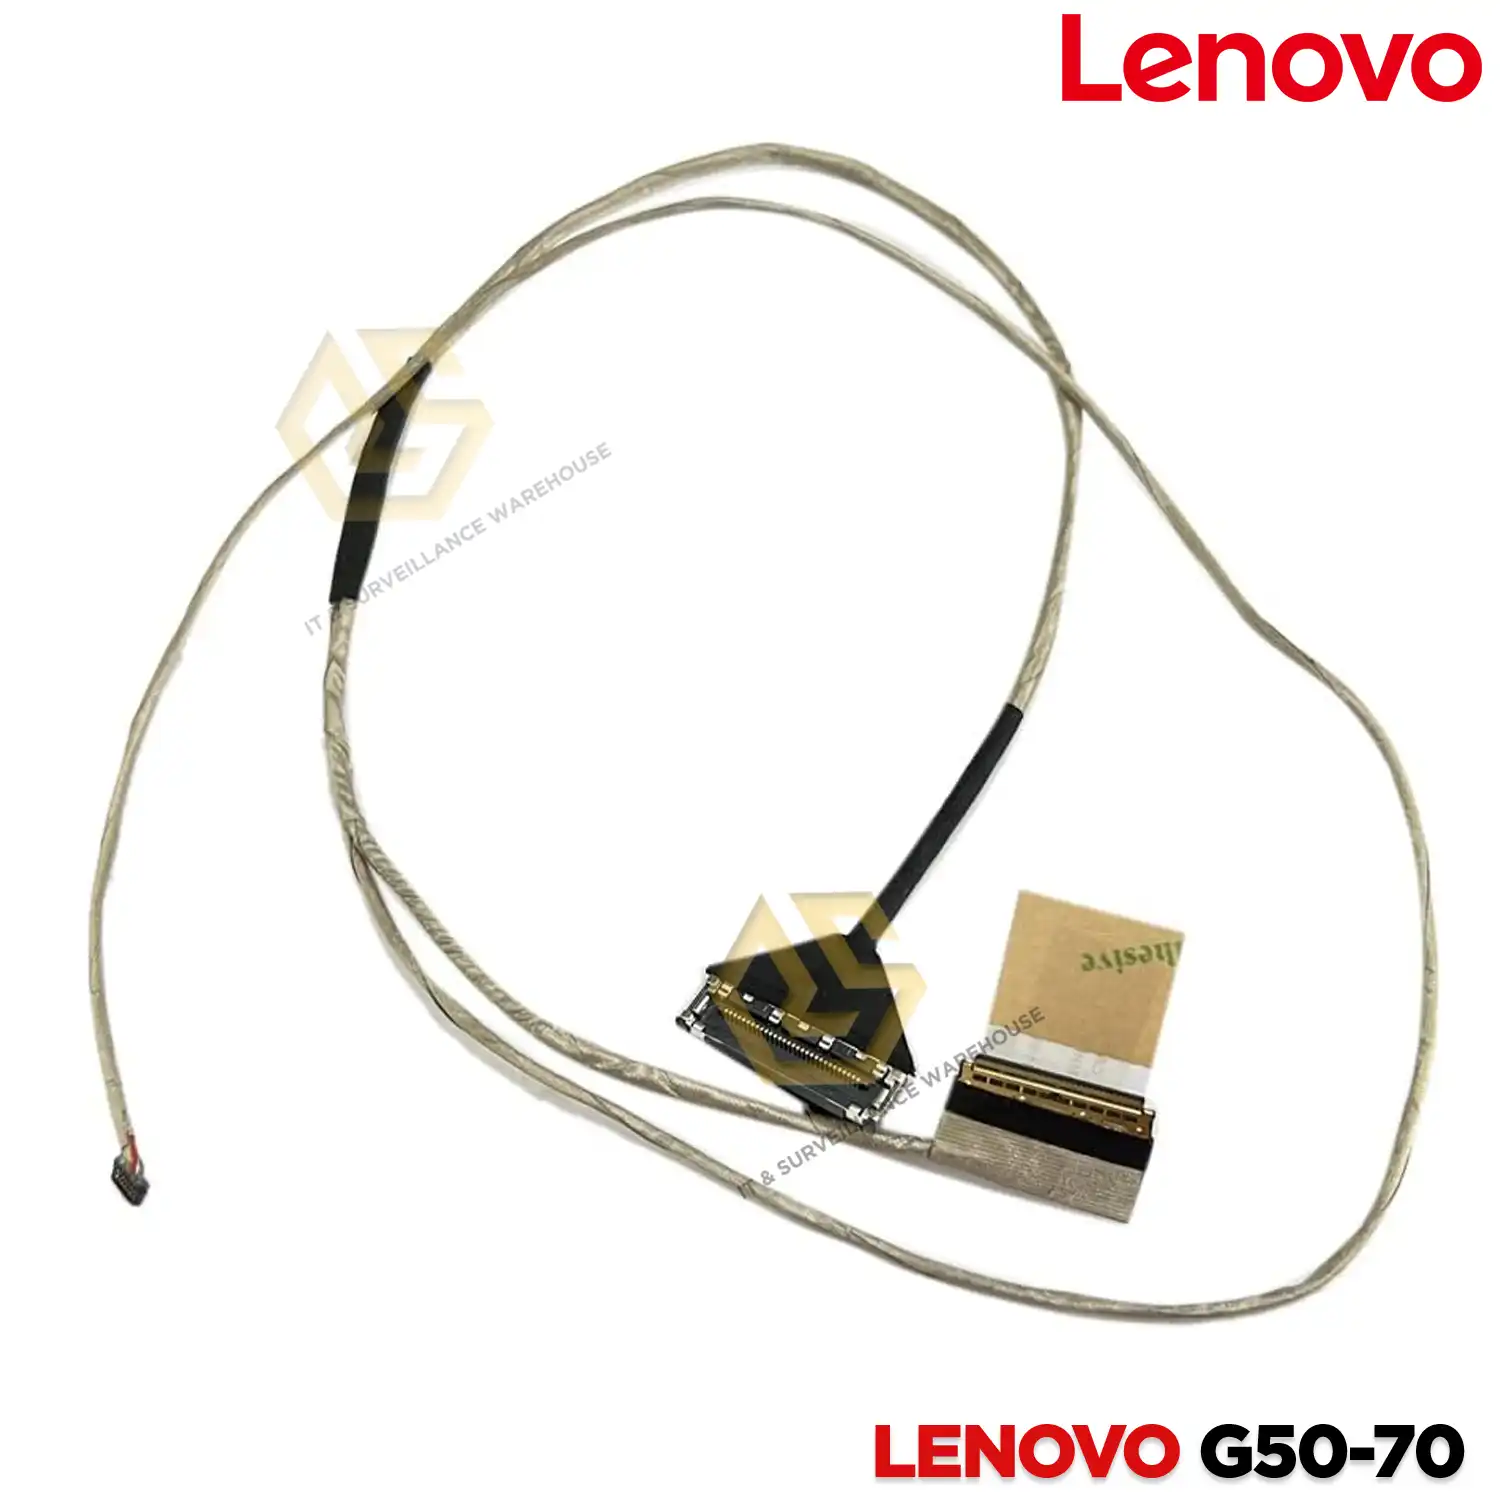 LAPTOP DISPLAY CABLE FOR LENOVO THINKPAD G50-70 | G50 | G50-45 | G50-30